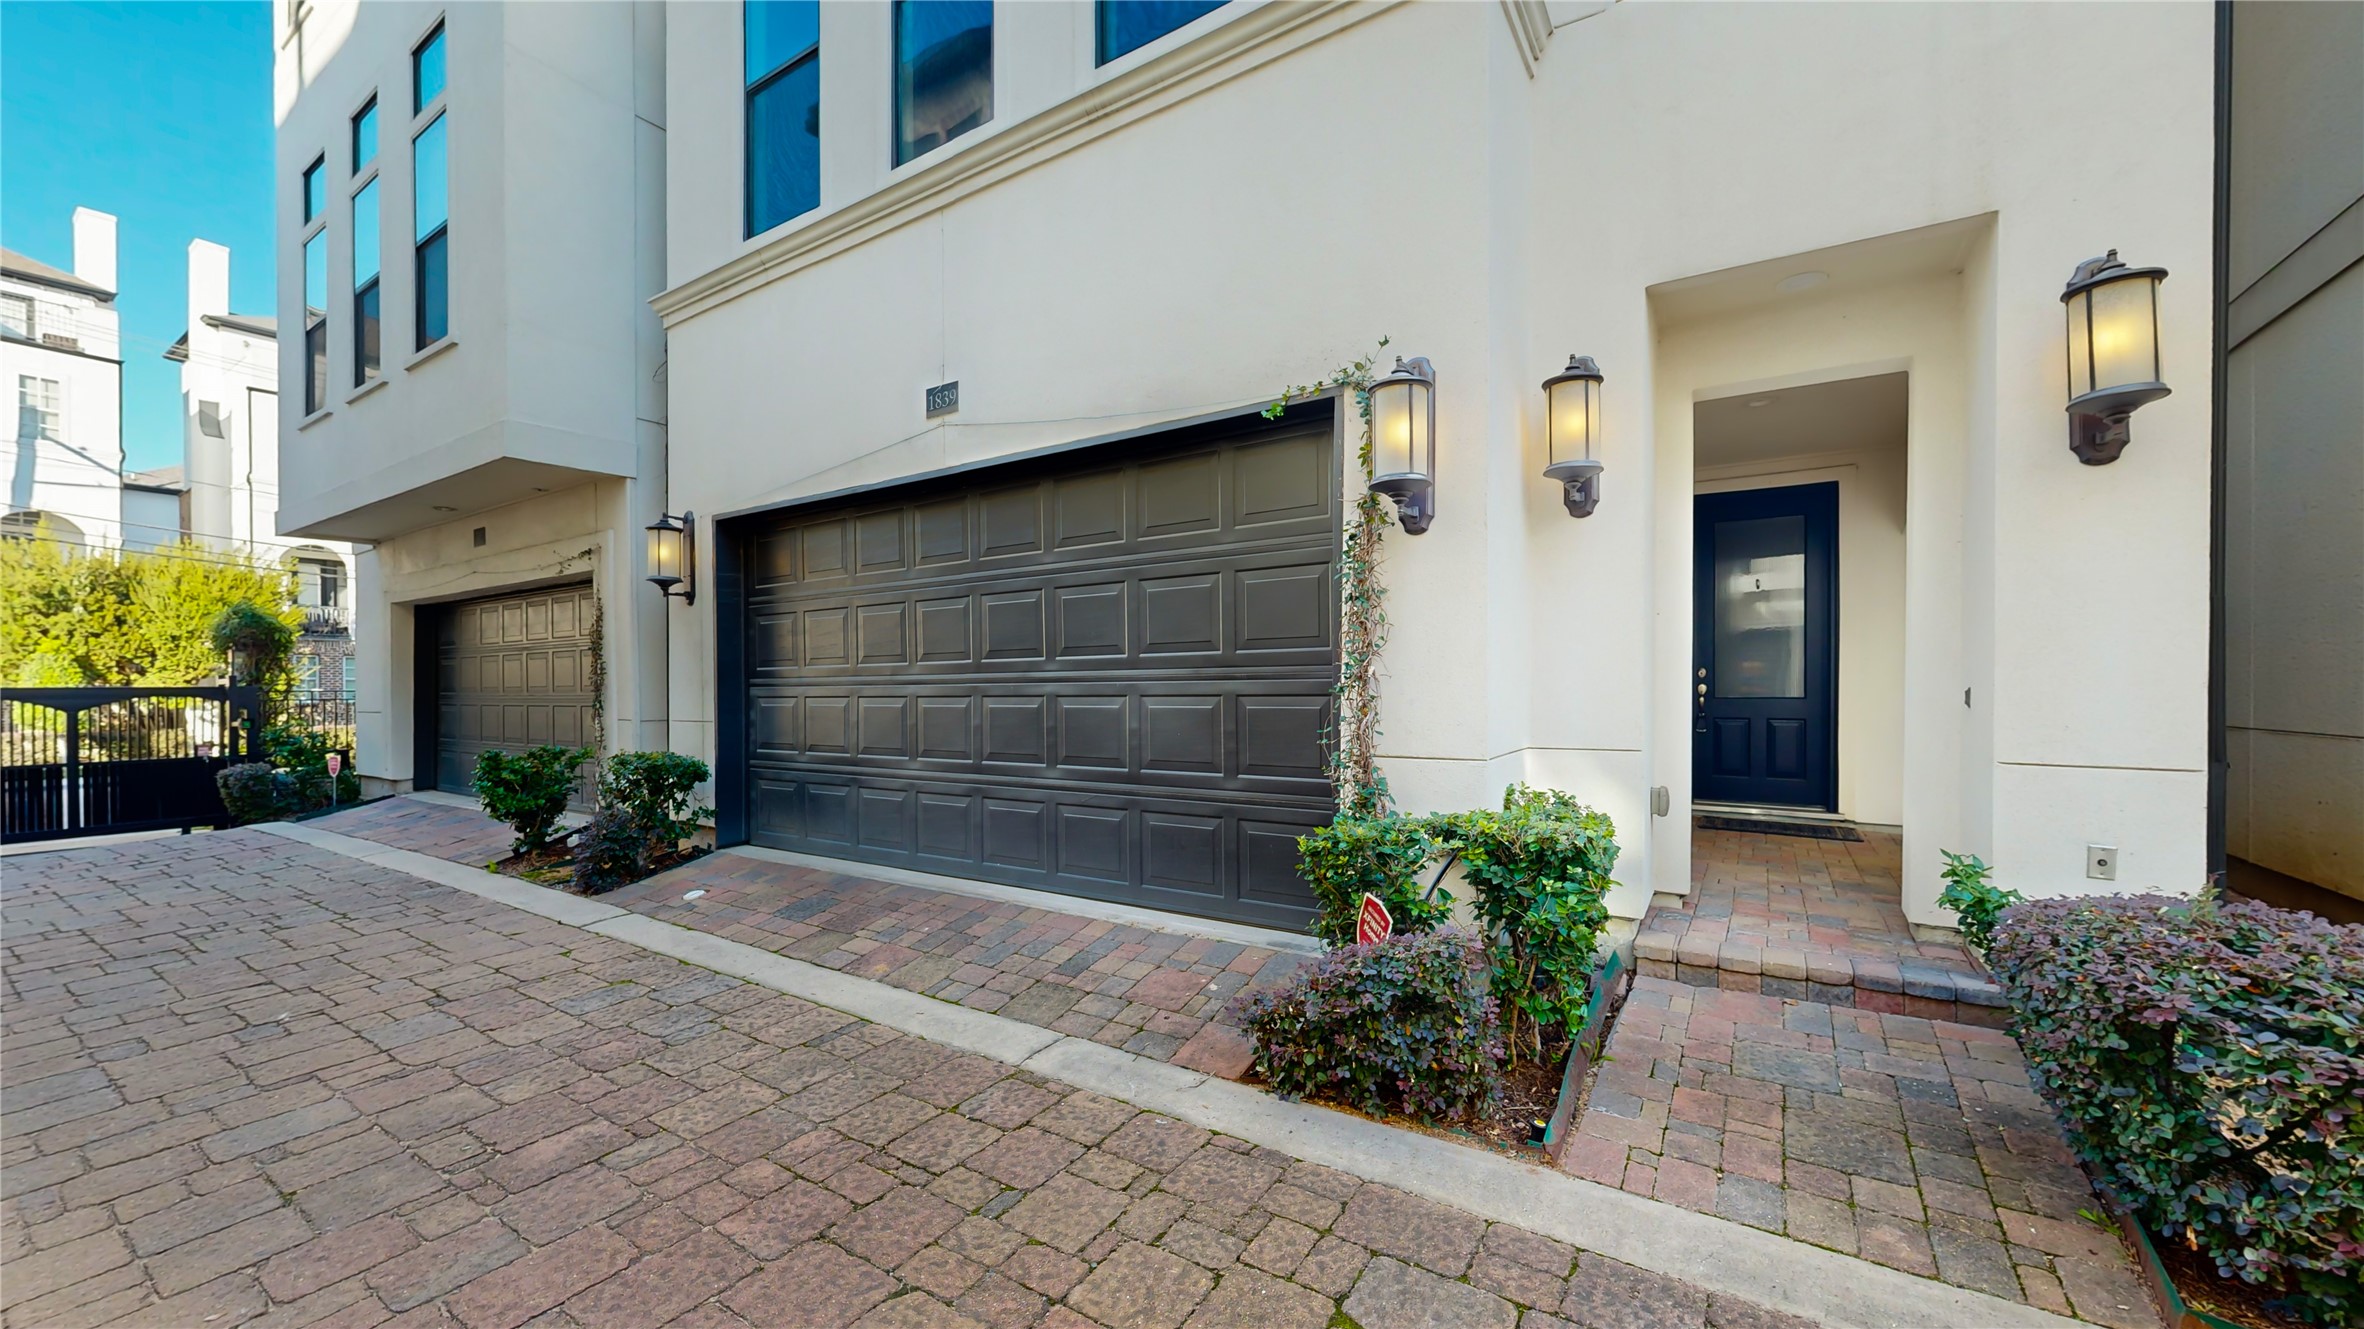 Enter through the electric gate into the beautiful stone driveway to your private garage.